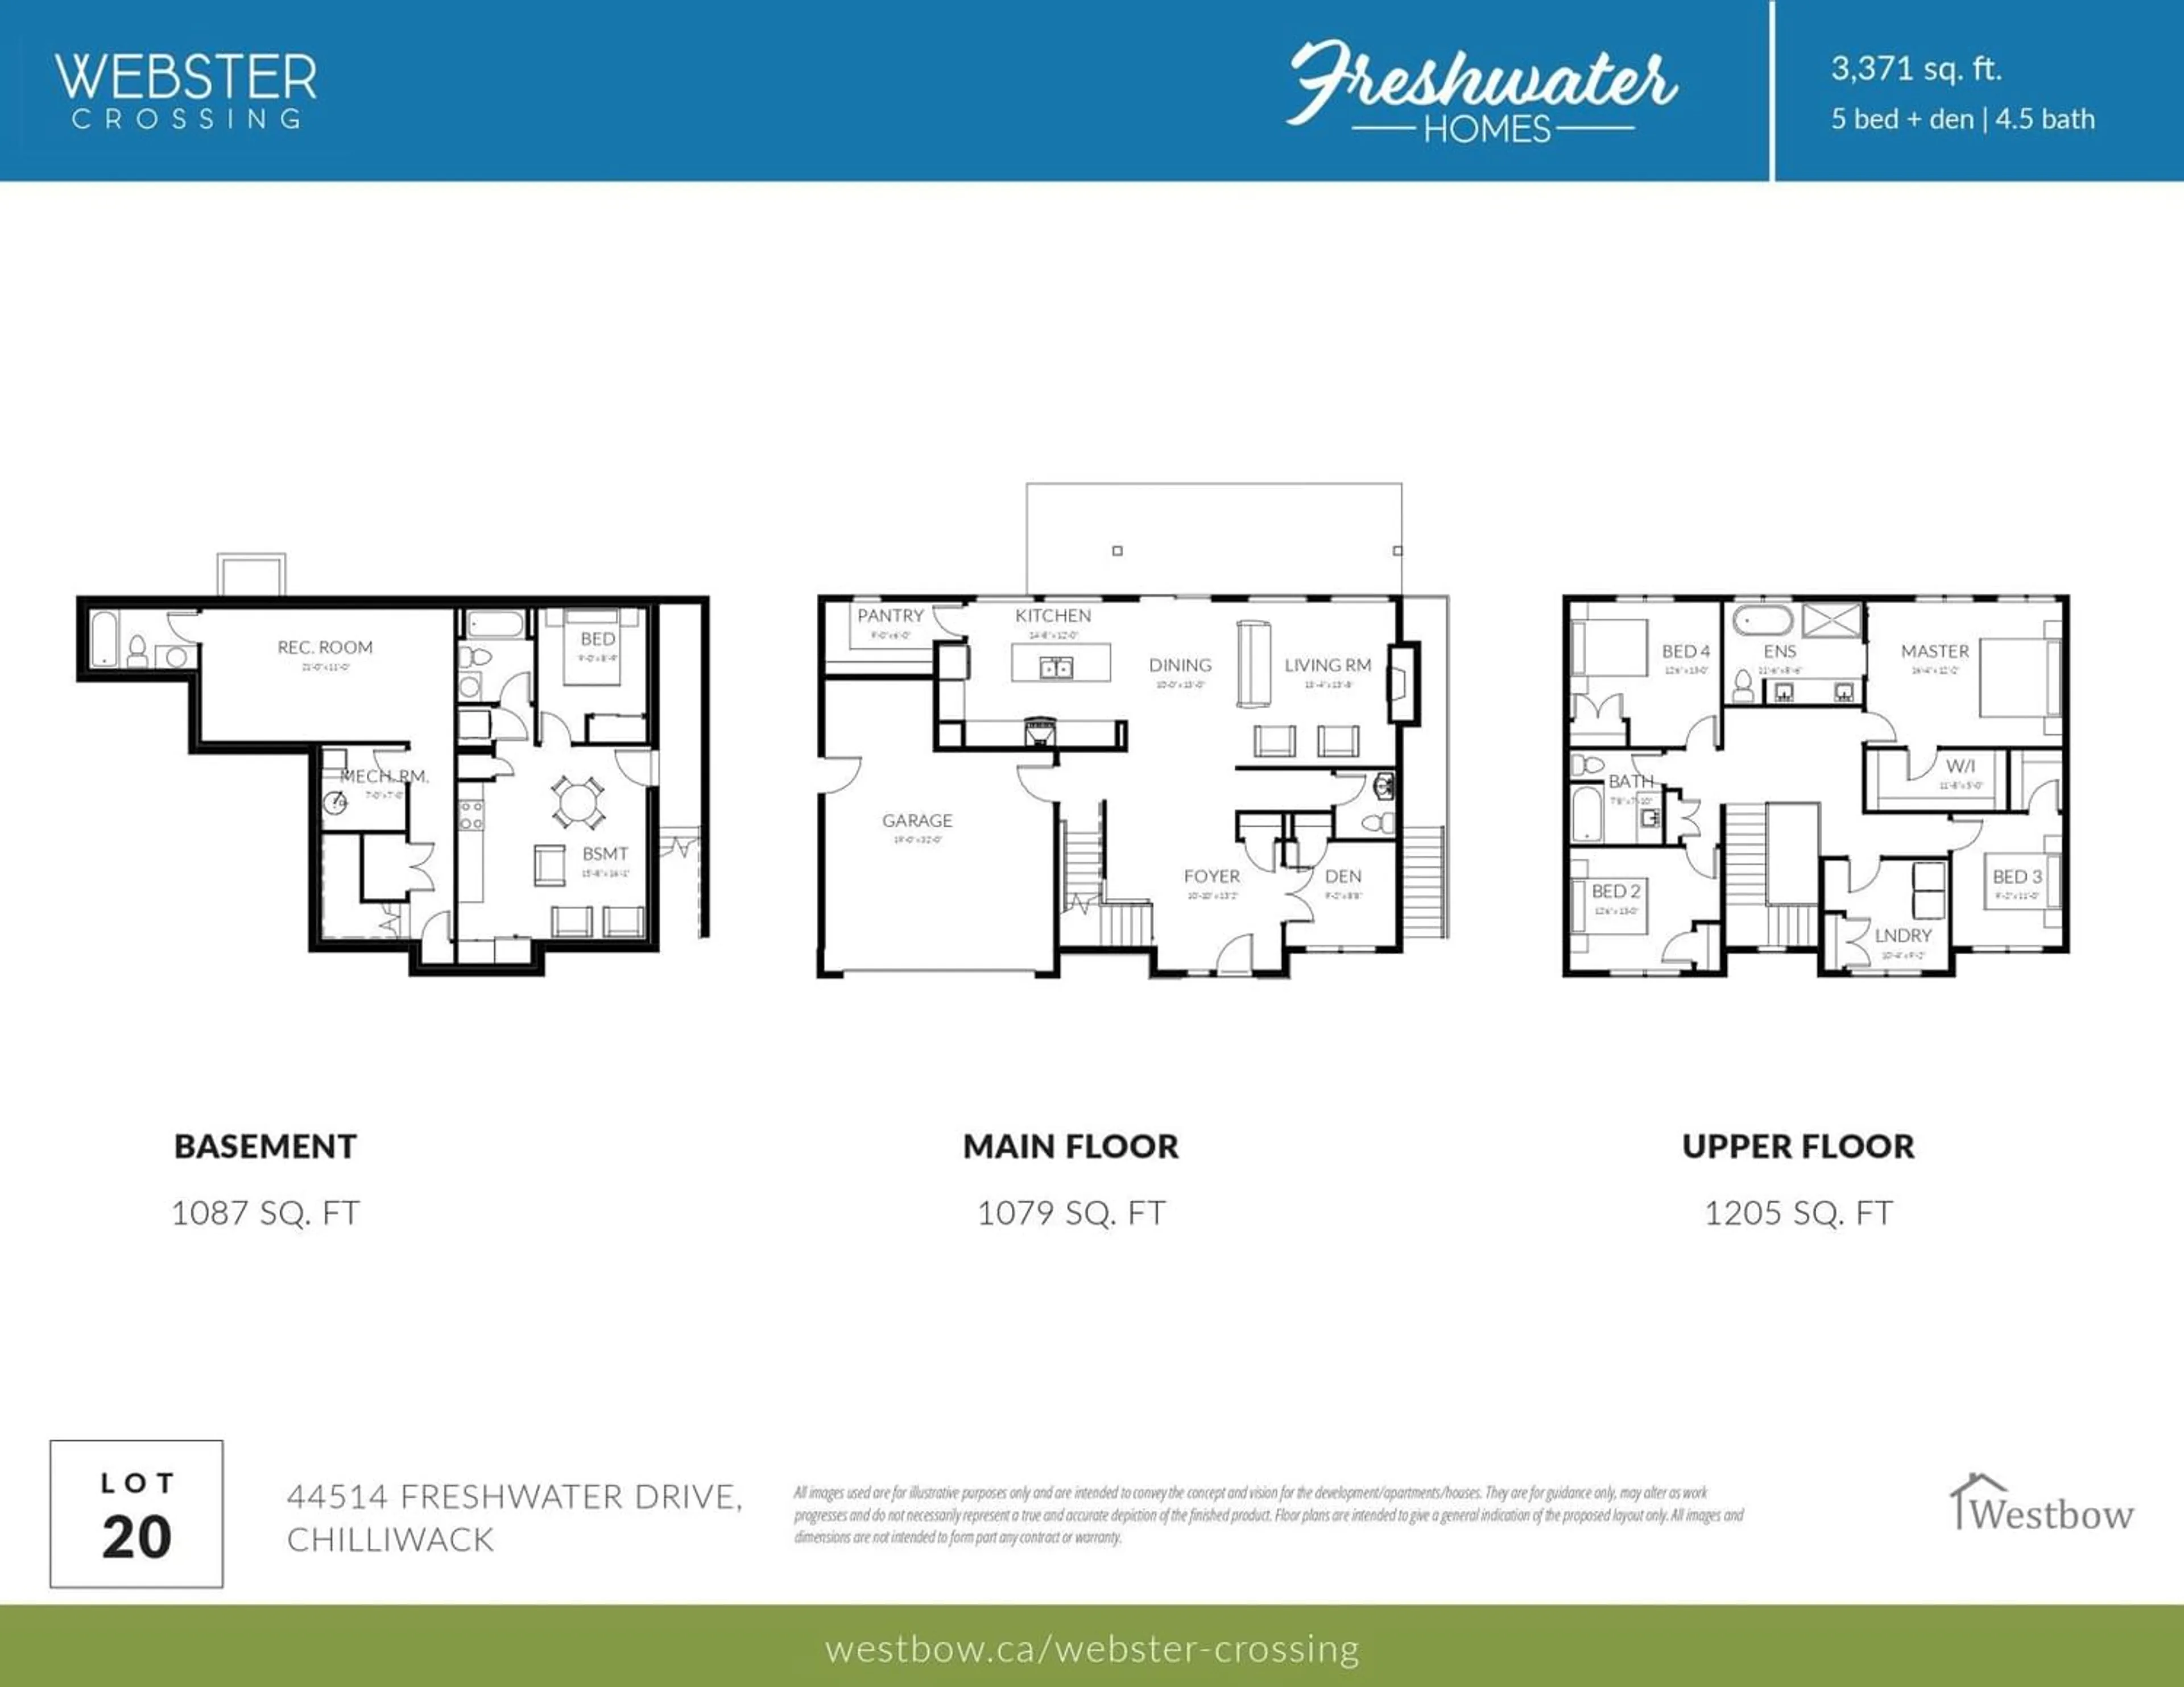 Floor plan for 44514 FRESHWATER DRIVE, Chilliwack British Columbia V2R6A3